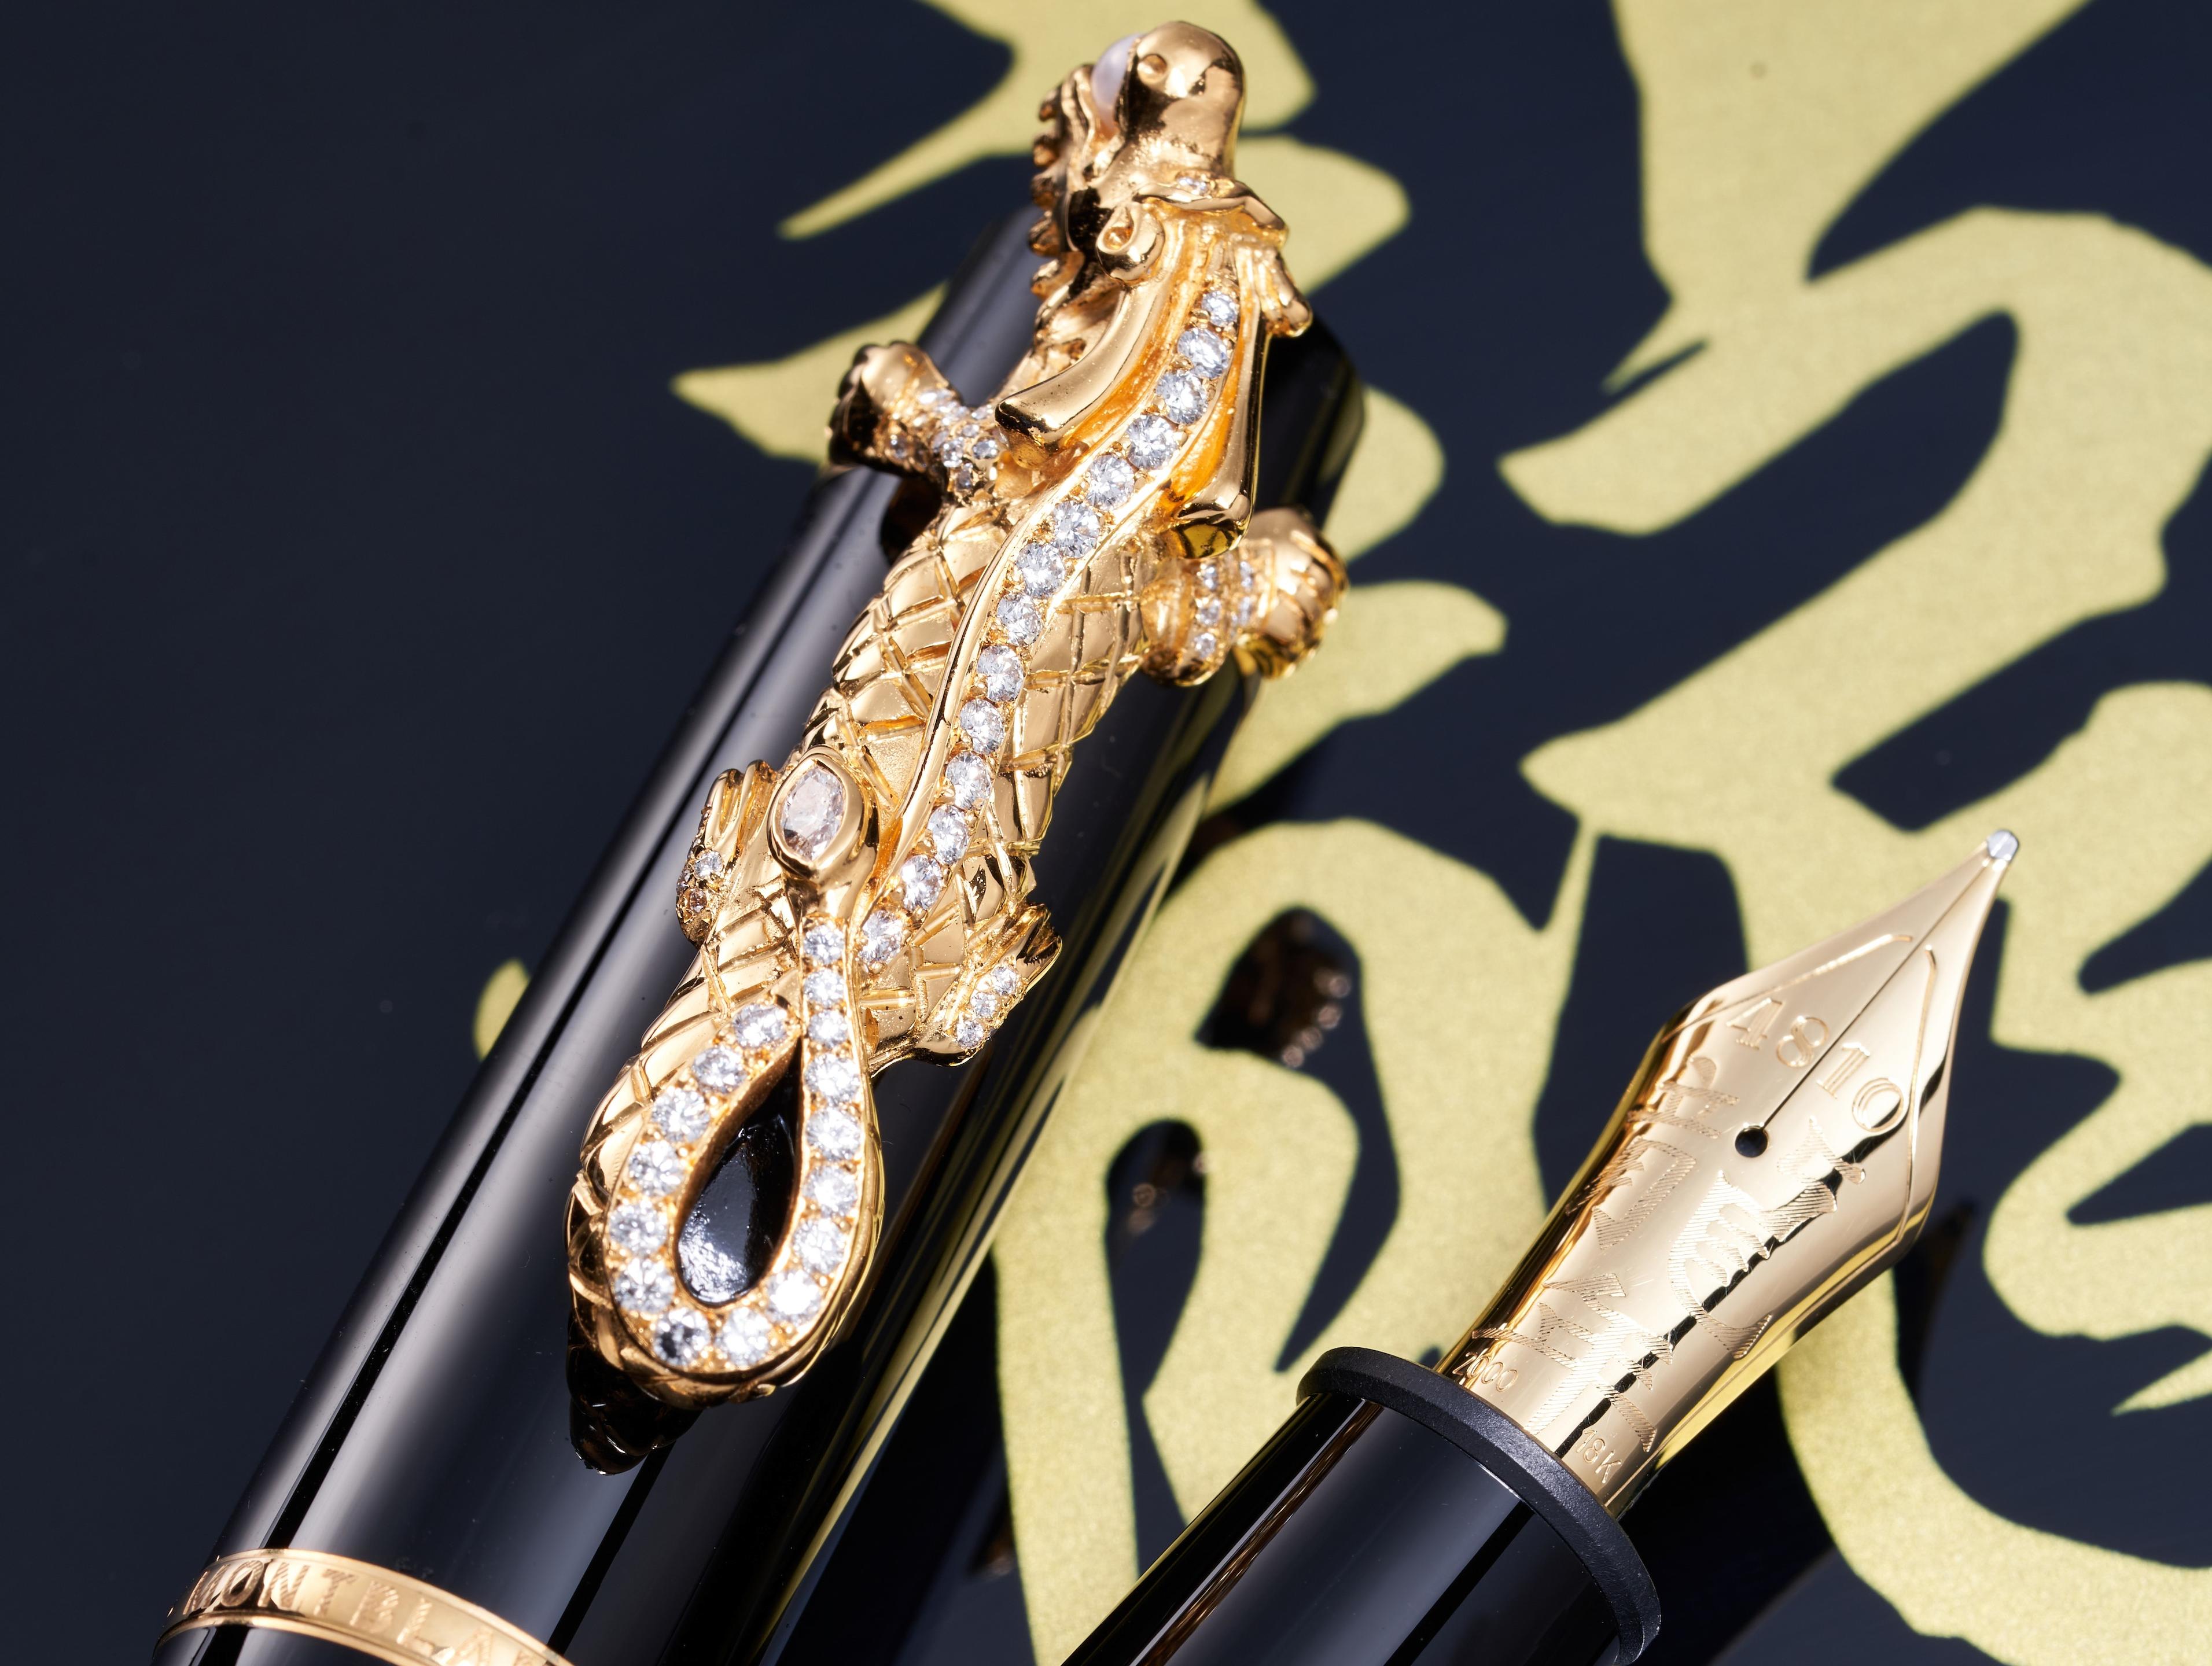 MONTBLANC | YEAR OF THE GOLDEN DRAGON 88- DIAMOND CREATION, REF. 28671, A VERY RARE 18K GOLD AND DIAMOND SET LIMITED EDITION FOUNTAIN PEN